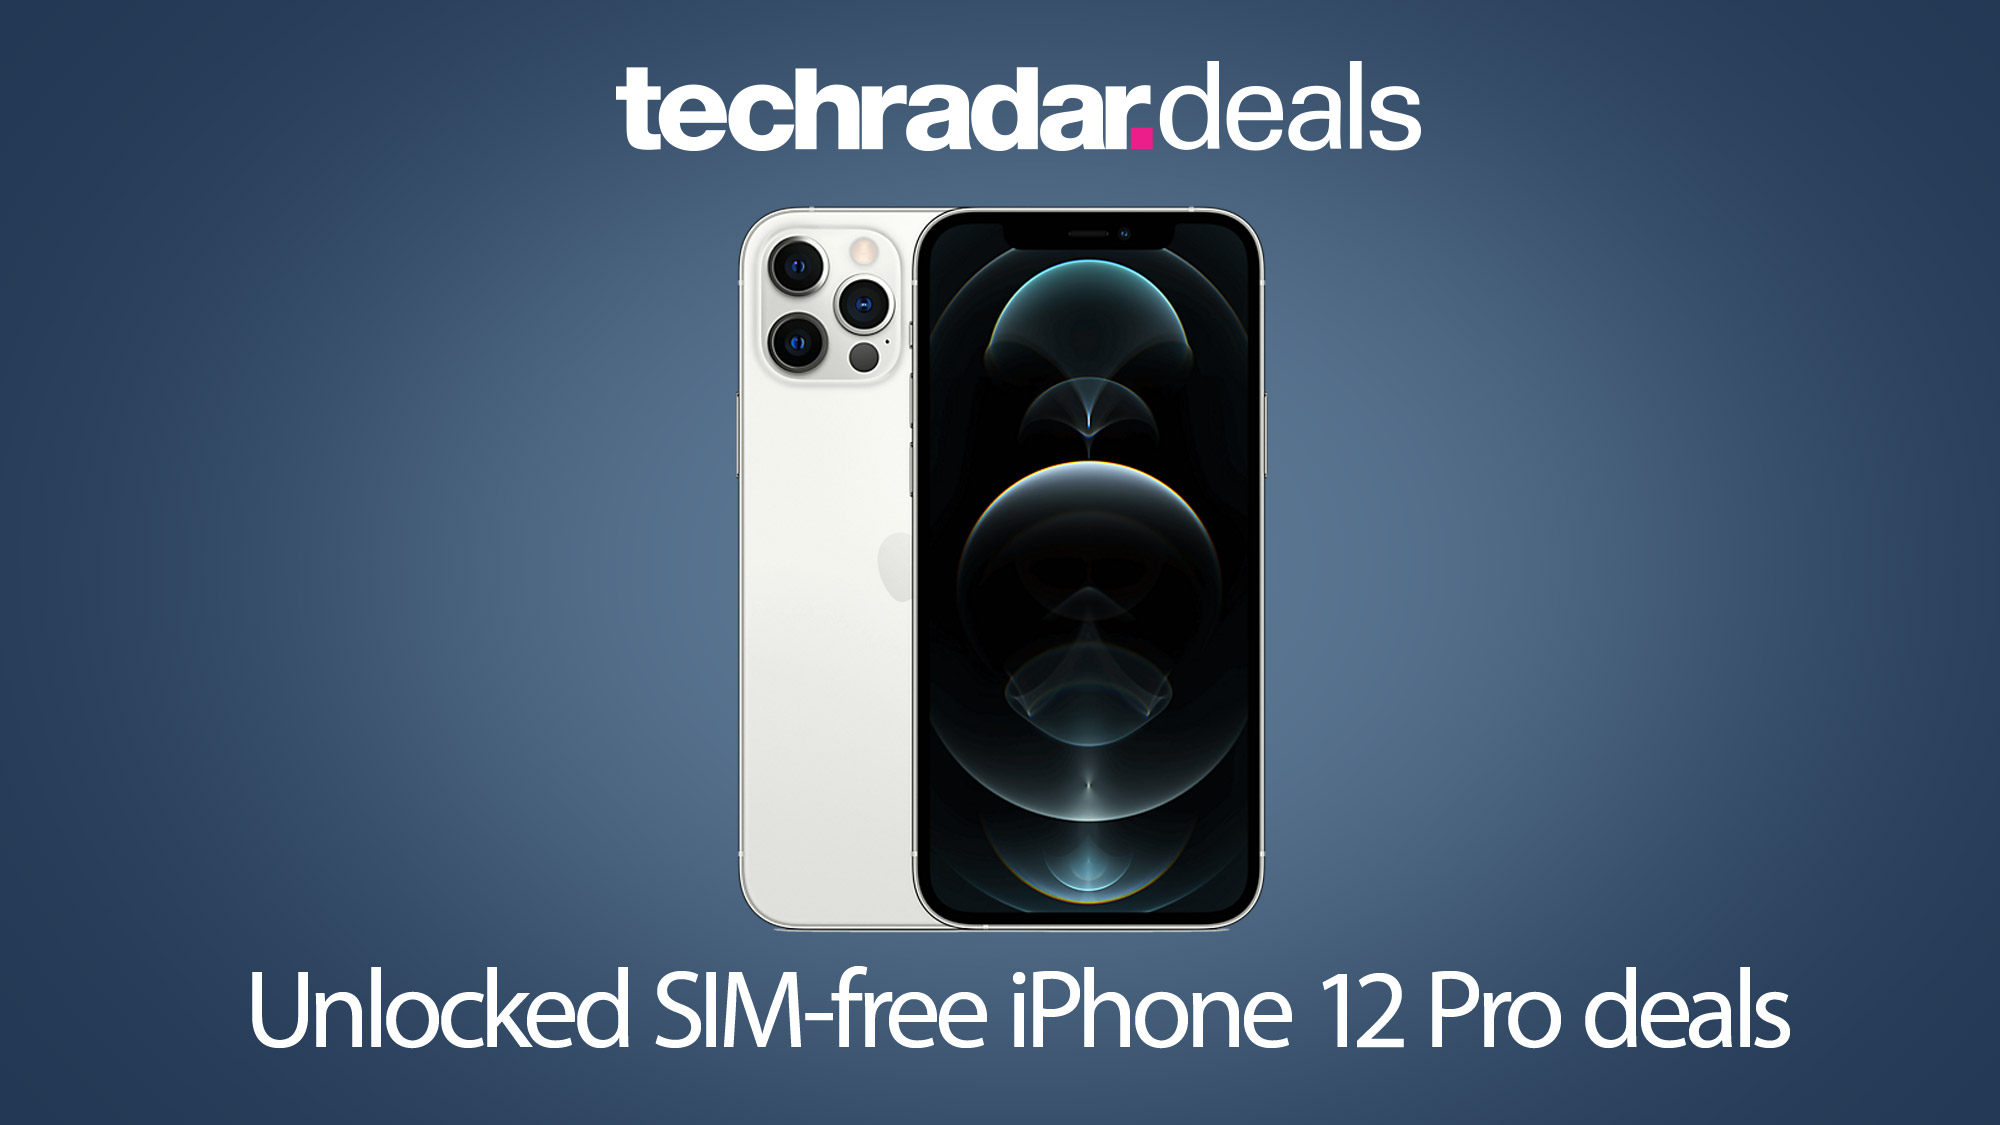 The cheapest iPhone 12 Pro SIM-free prices in December 2021 